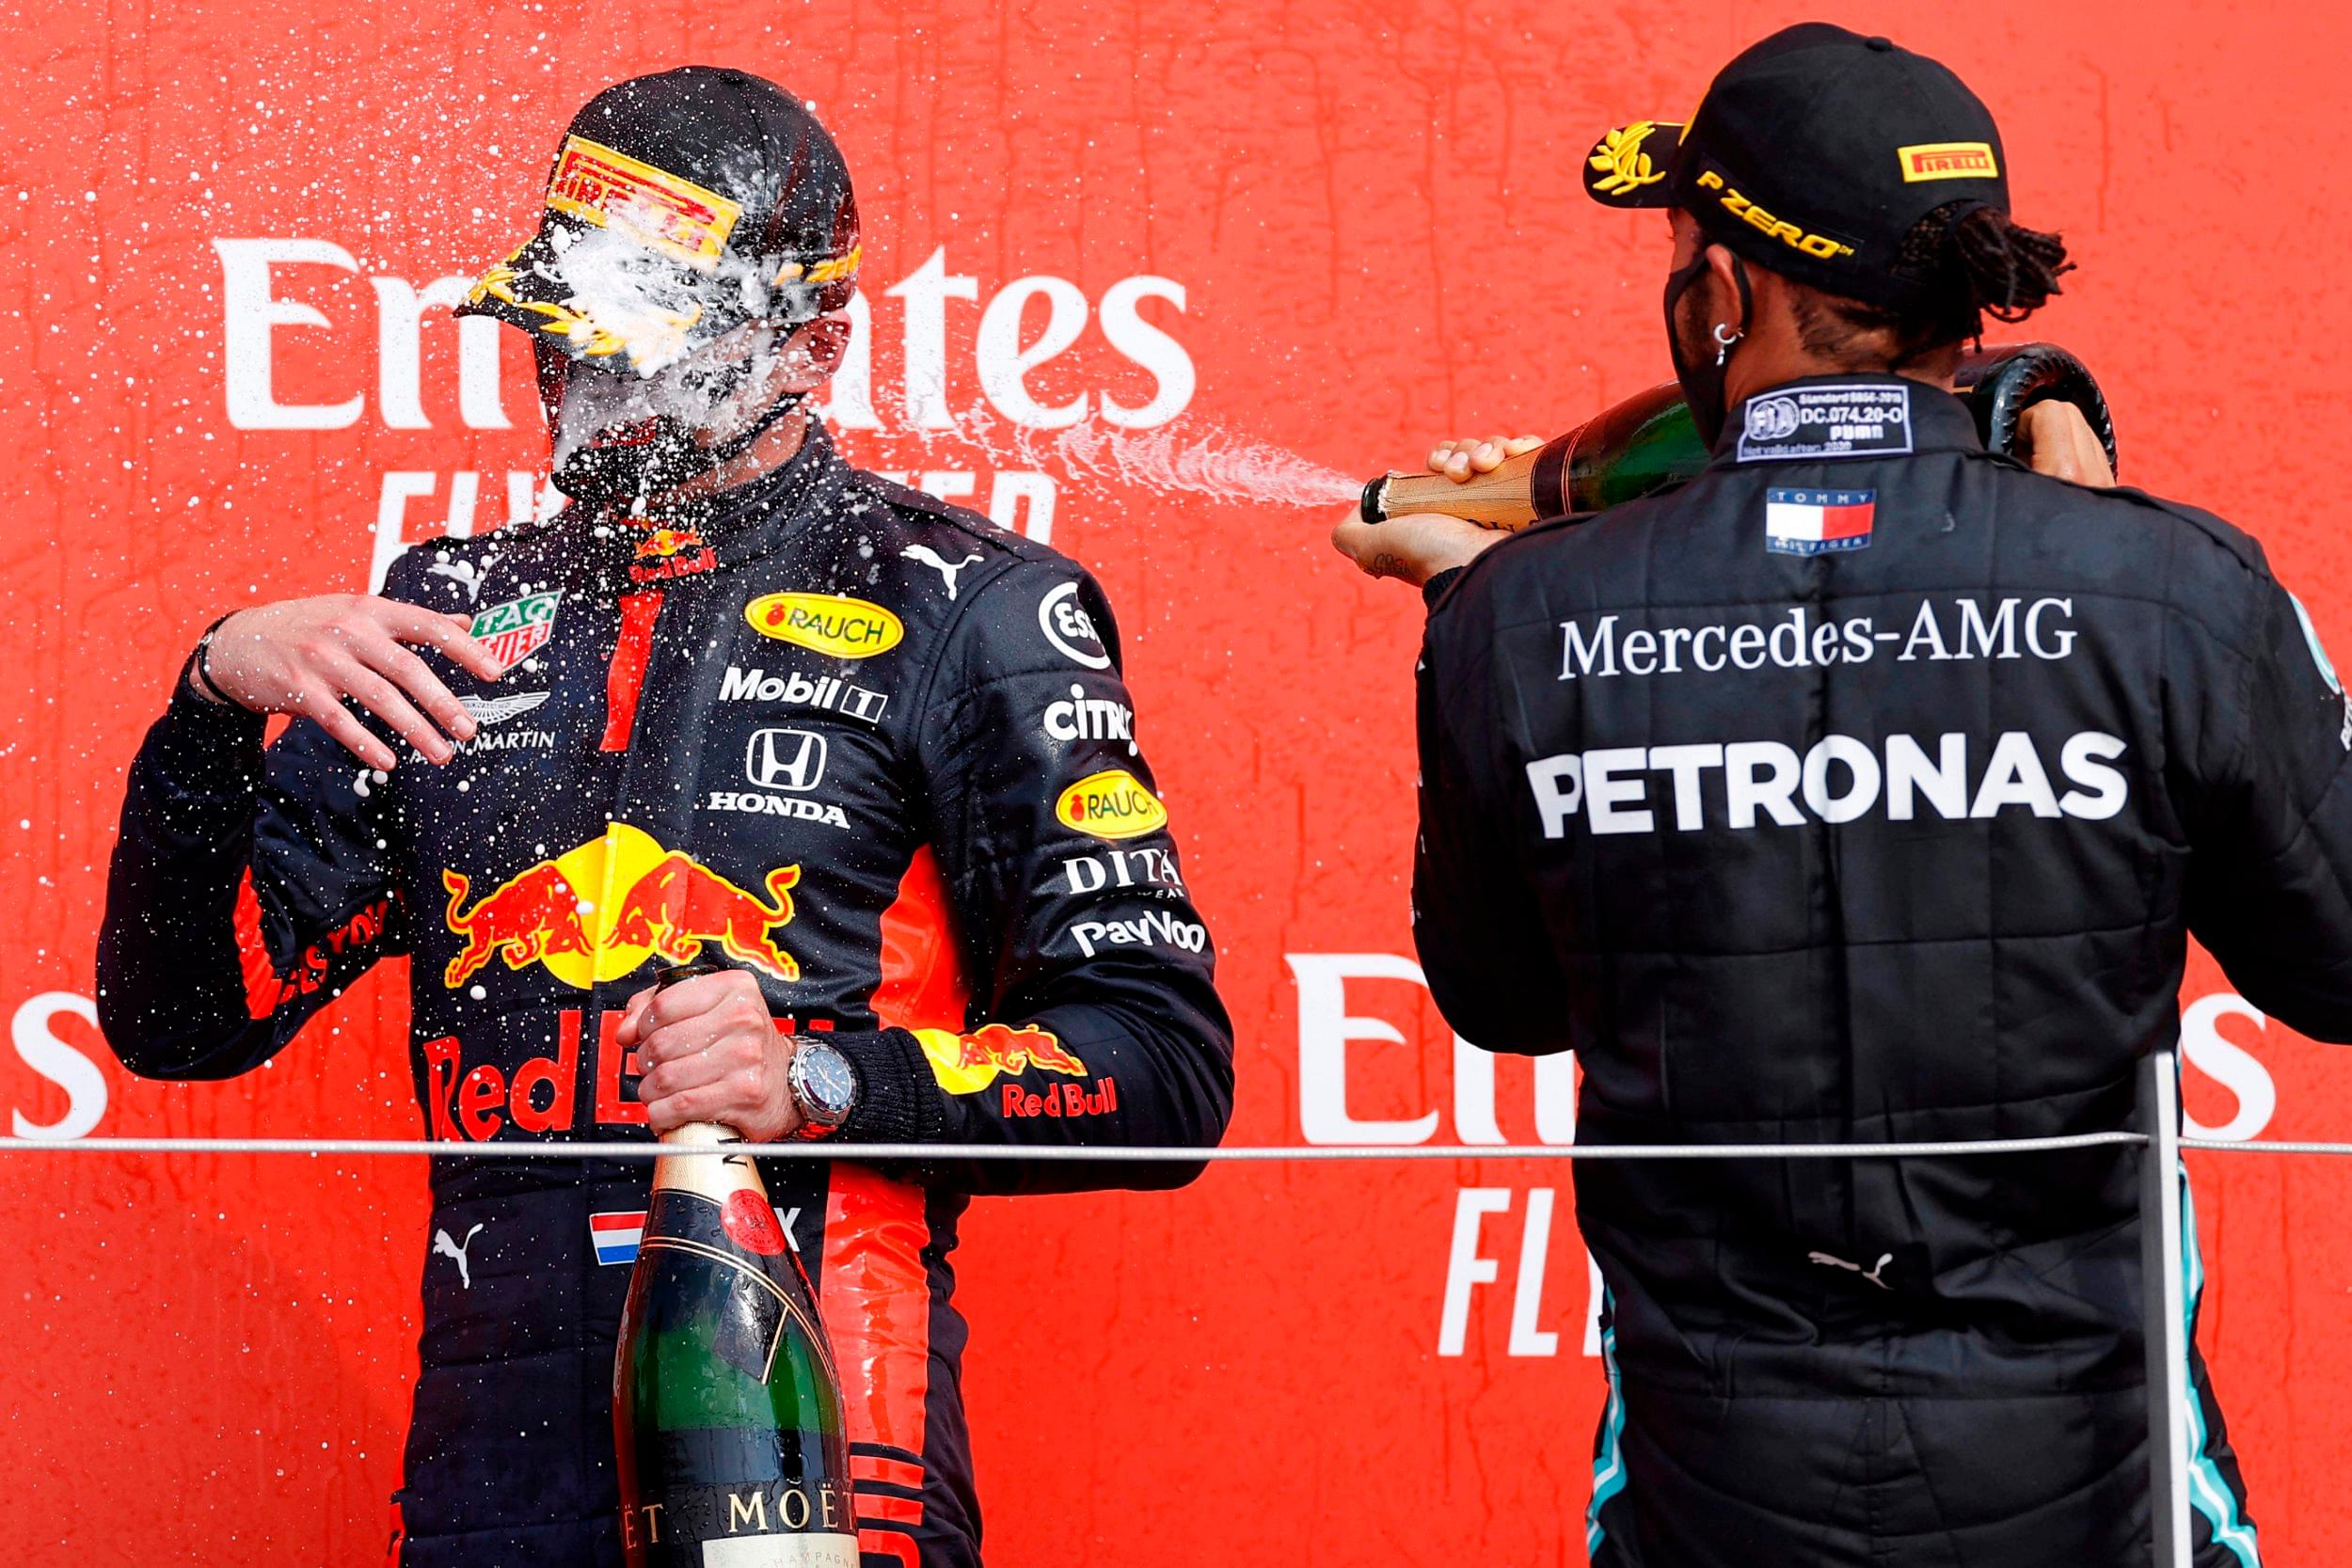 “I don’t think we are the favourites" - Max Verstappen believes Mercedes still have edge over Red Bull